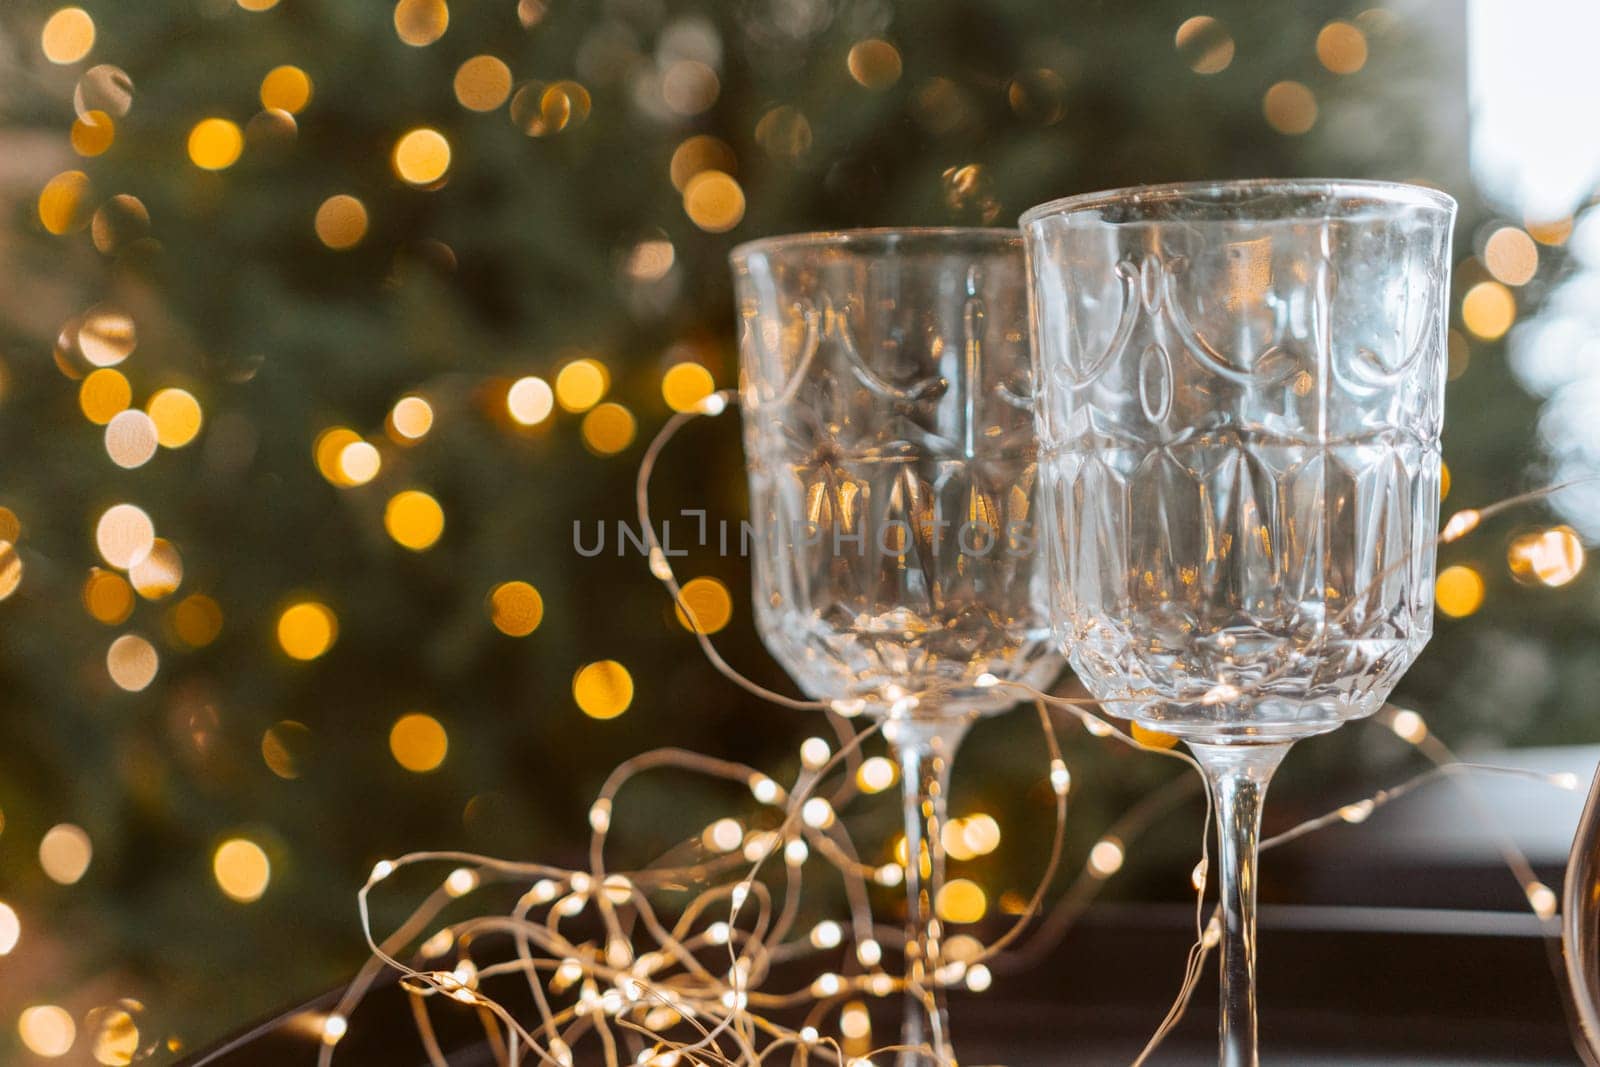 Champagne glasses, New Year decor. New Year's festive setting, family holidays.Two glasses of champagne are on the table against the background of New Year's decorated tree